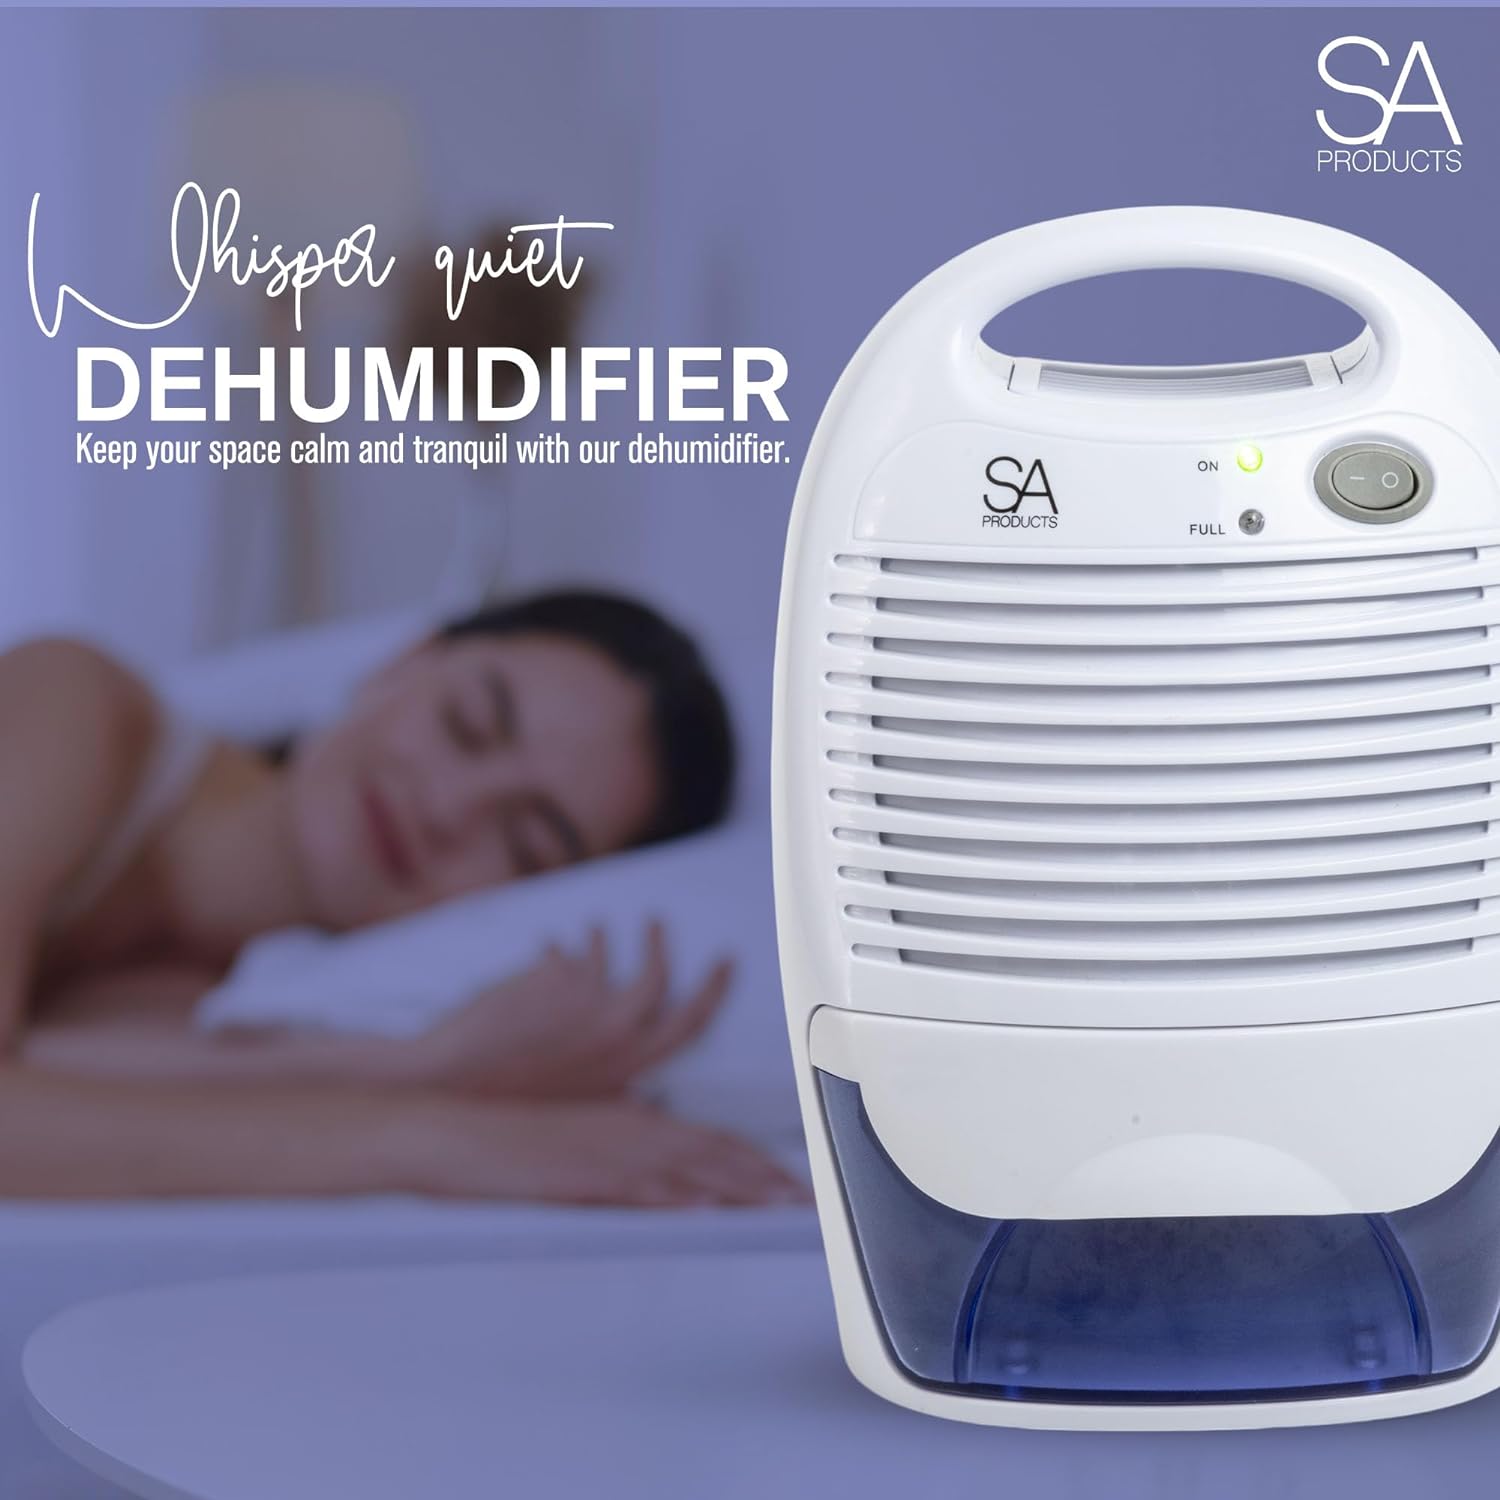 SA Products 700ml Dehumidifier, Small Dehumidifier | Dehumidifiers for Home | Portable Dehumidifier and Air Purifier | Moisture Absorbers for Home, Dehumidifier for Bedroom, Bathroom (White) - Amazing Gadgets Outlet